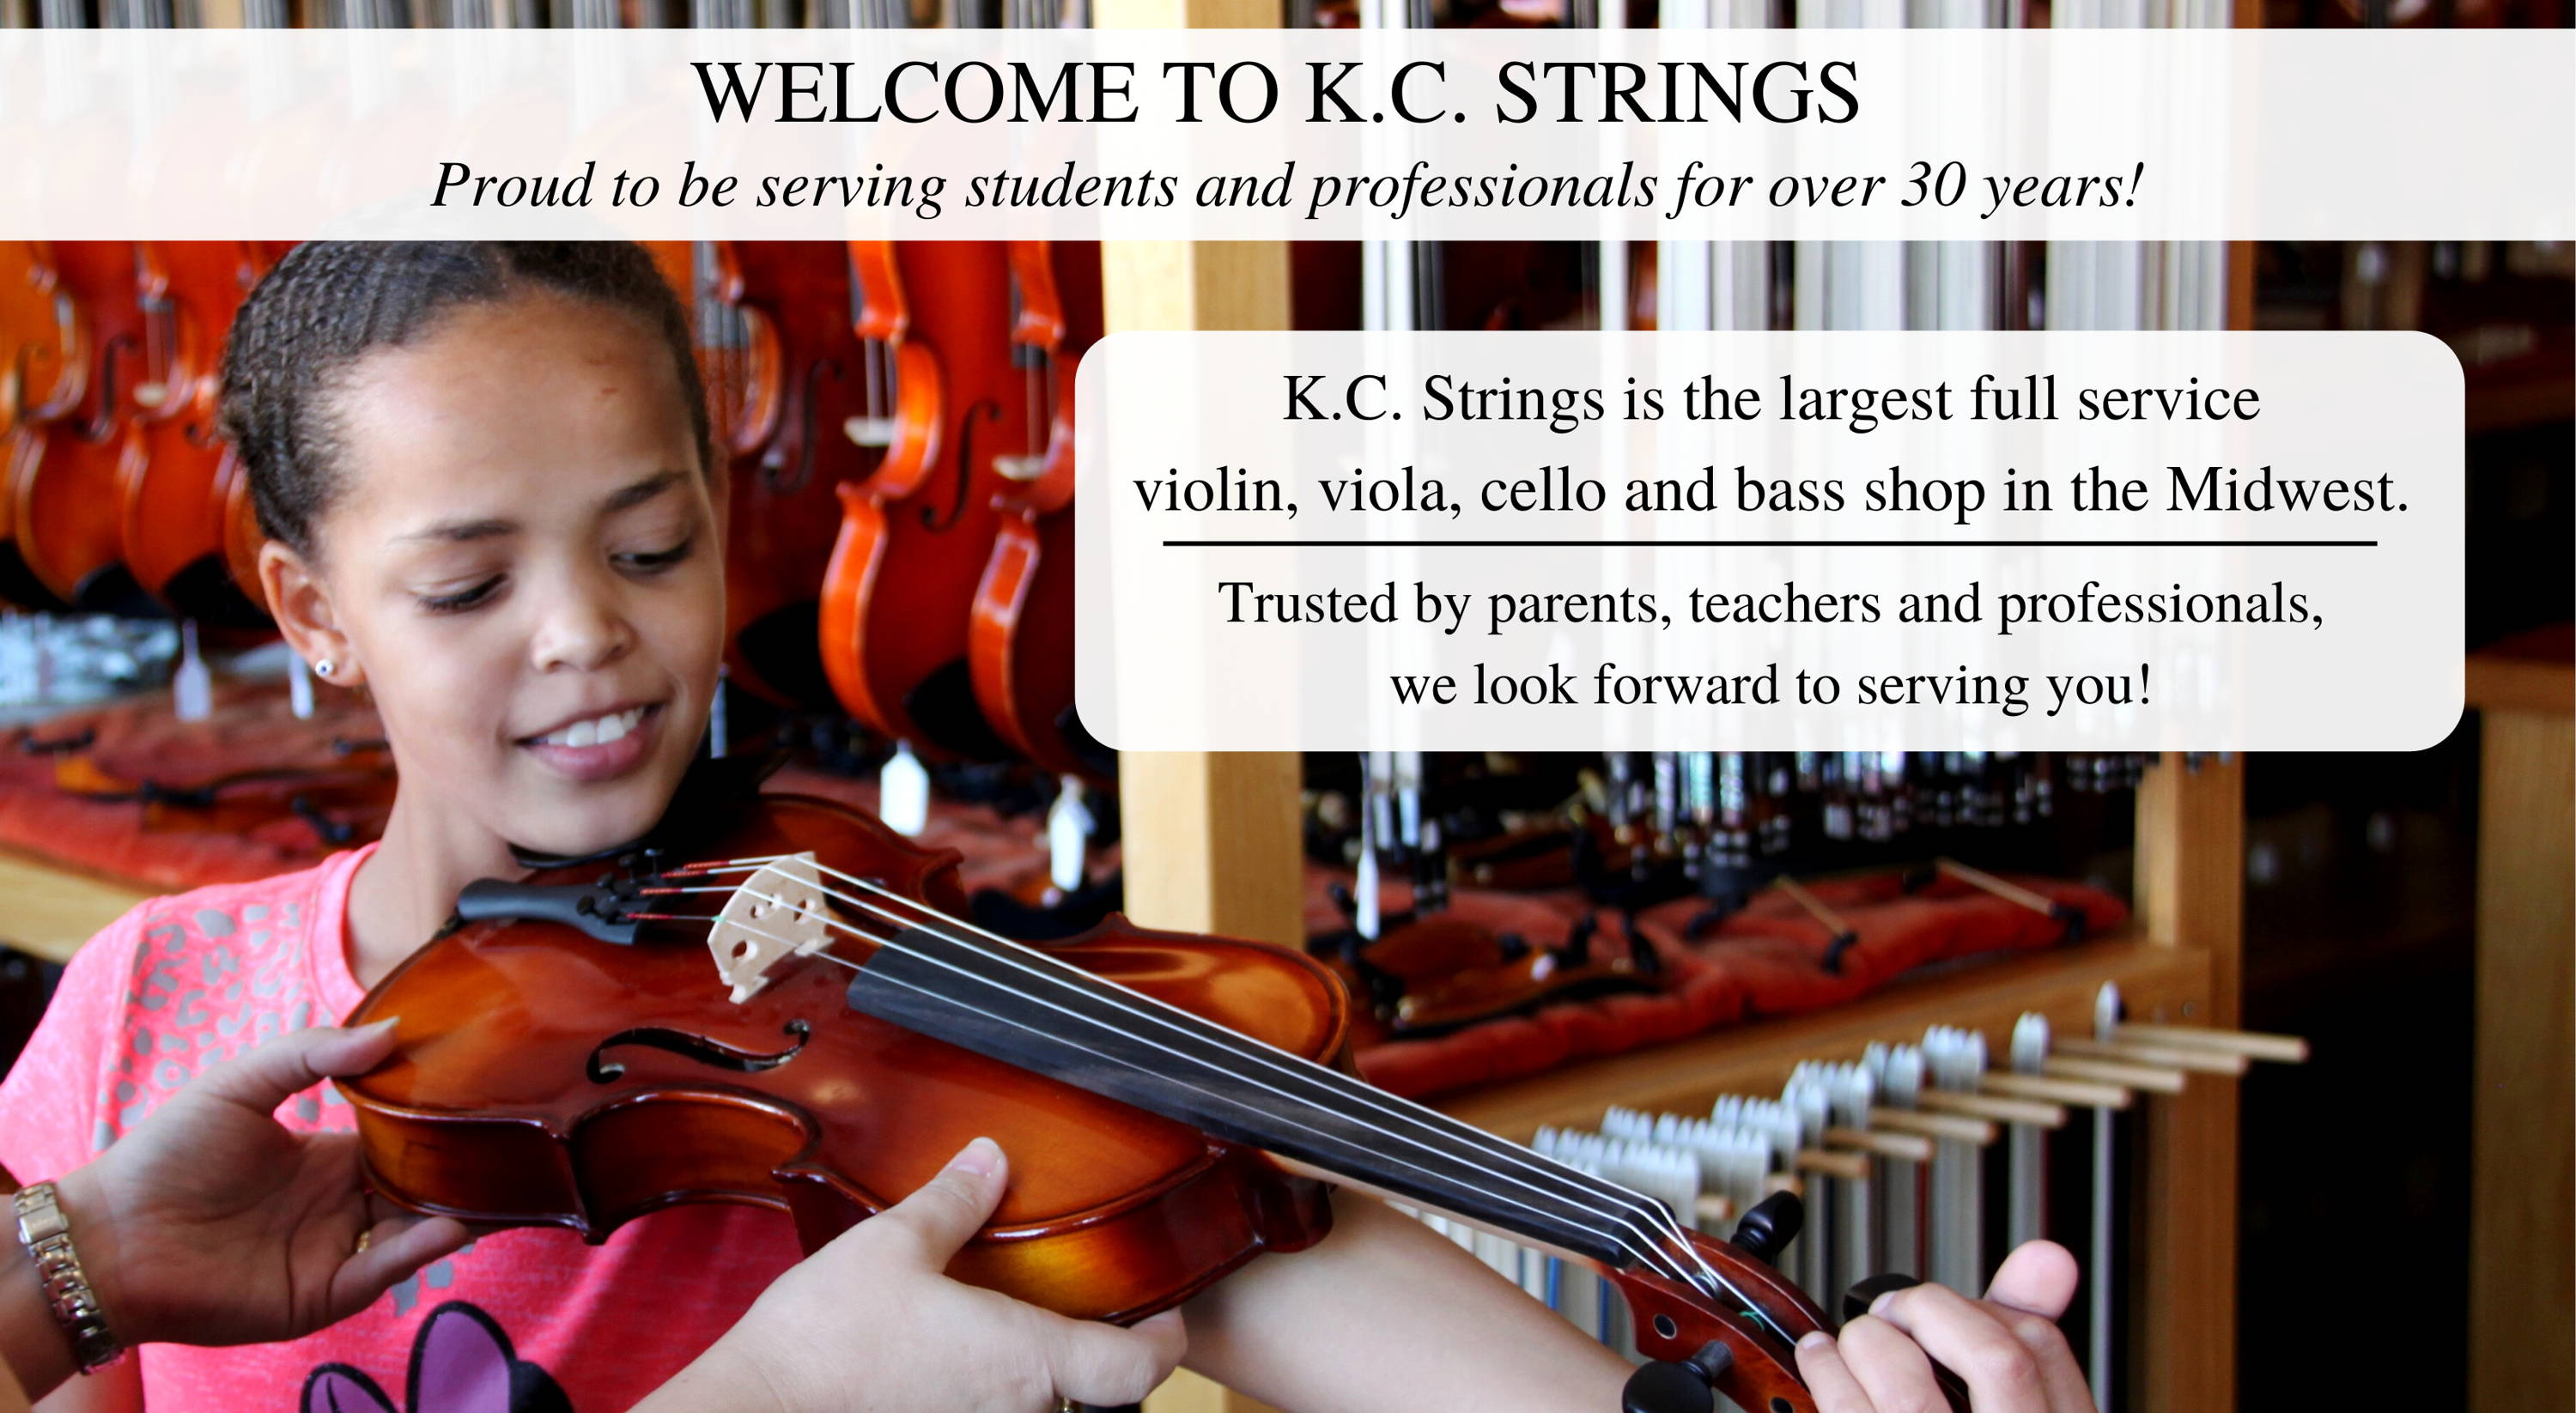 Welcome to K.C. Strings